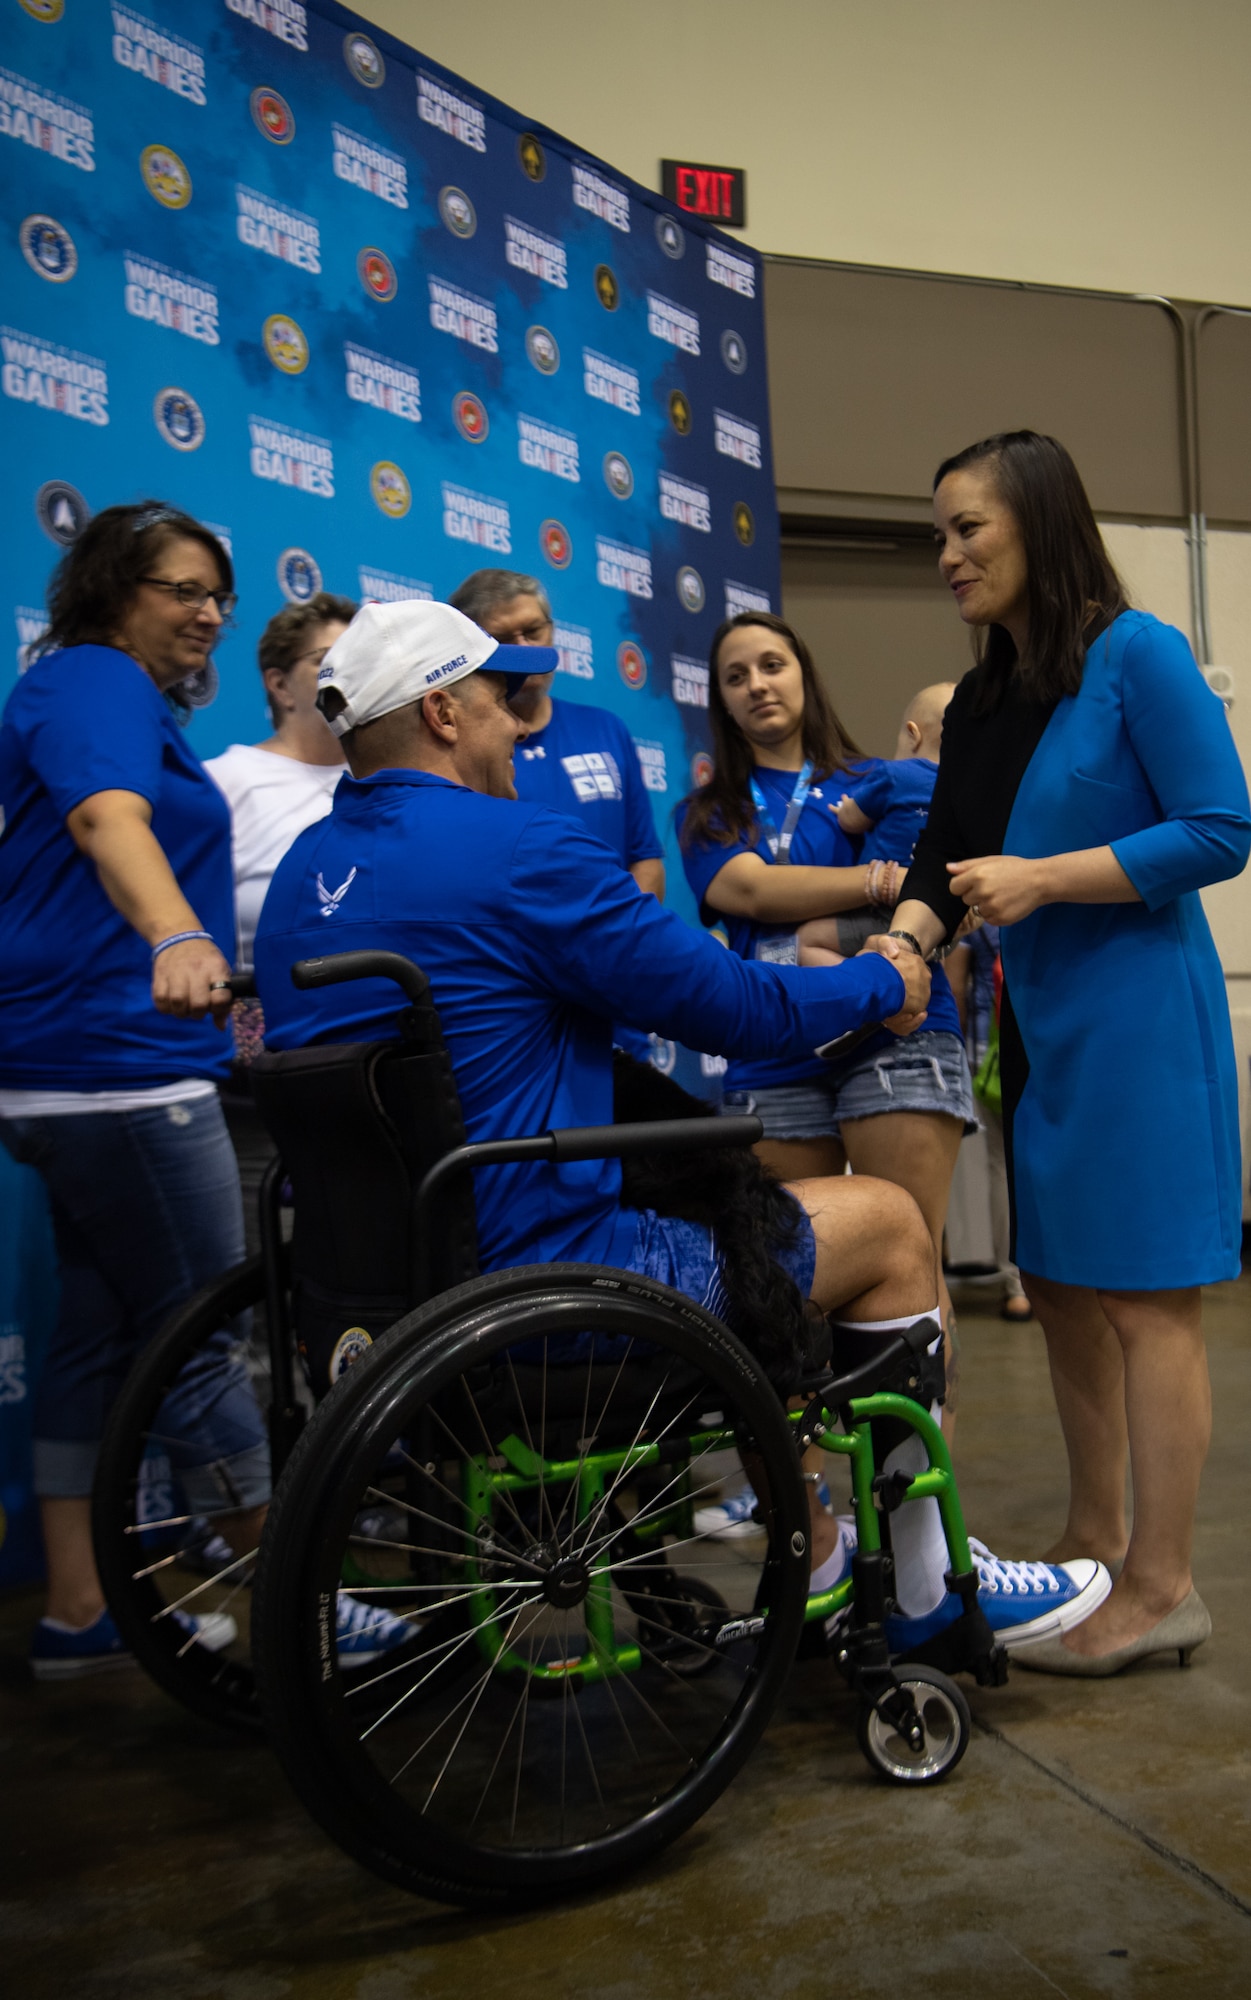 The Warrior Games is a Paralympic-style adaptive sports event showcasing the power of adaptive sports as part of recovery and the overall long-term resiliency of wounded, ill and injured service men and women around the DoD. (U.S. Air Force Photo by Shannon Hall)